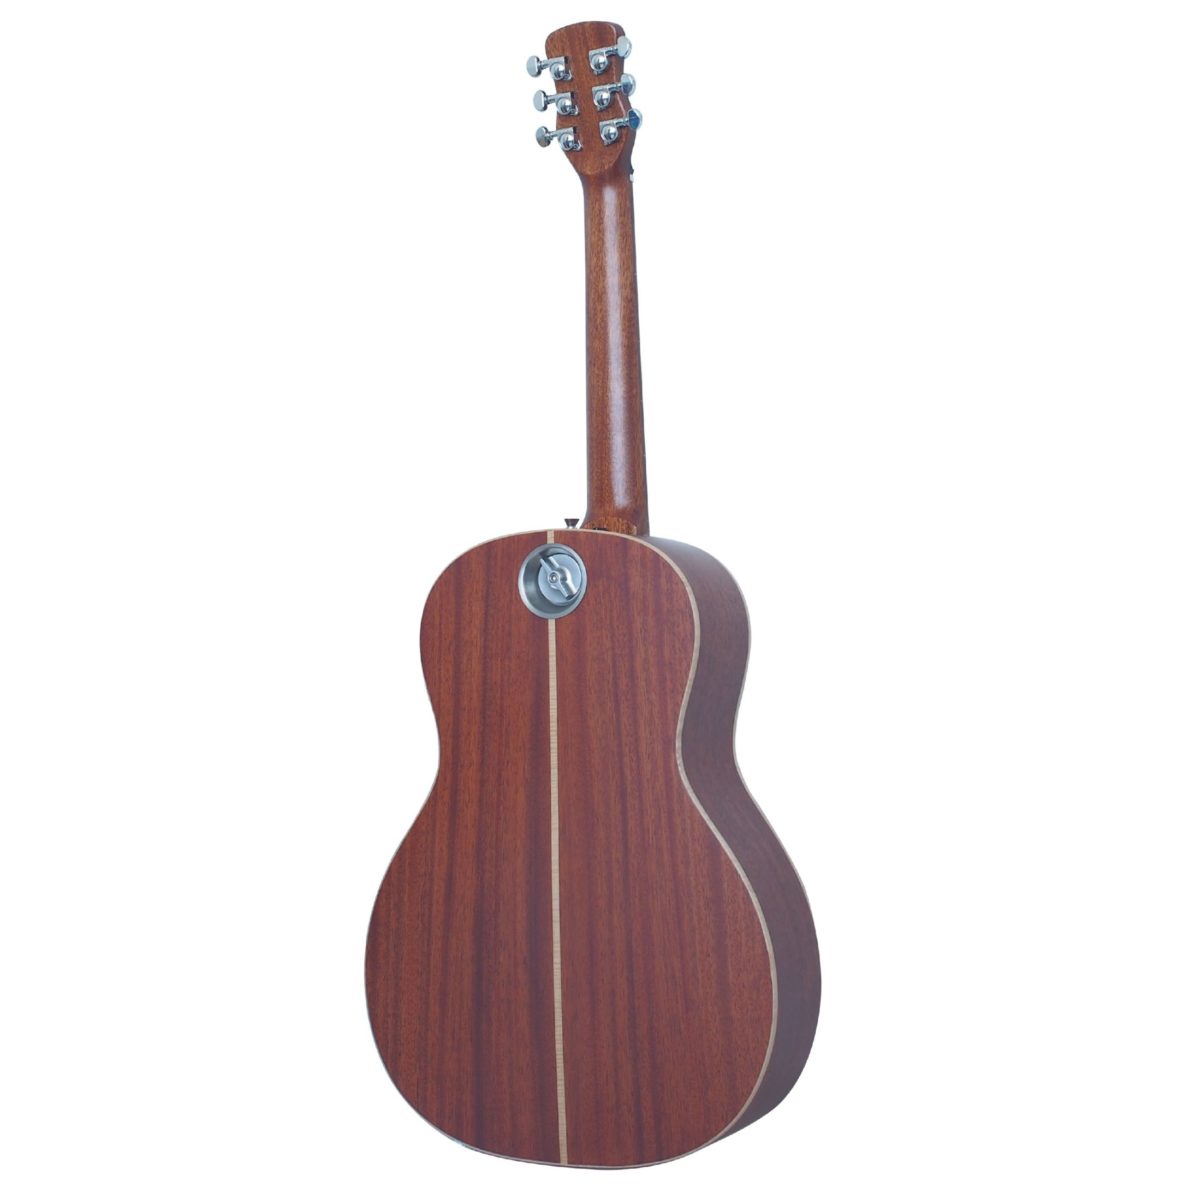 Journey Instruments FP412 - Solid Sitka/Solid African Mahogany Parlour Collapsible Guitar